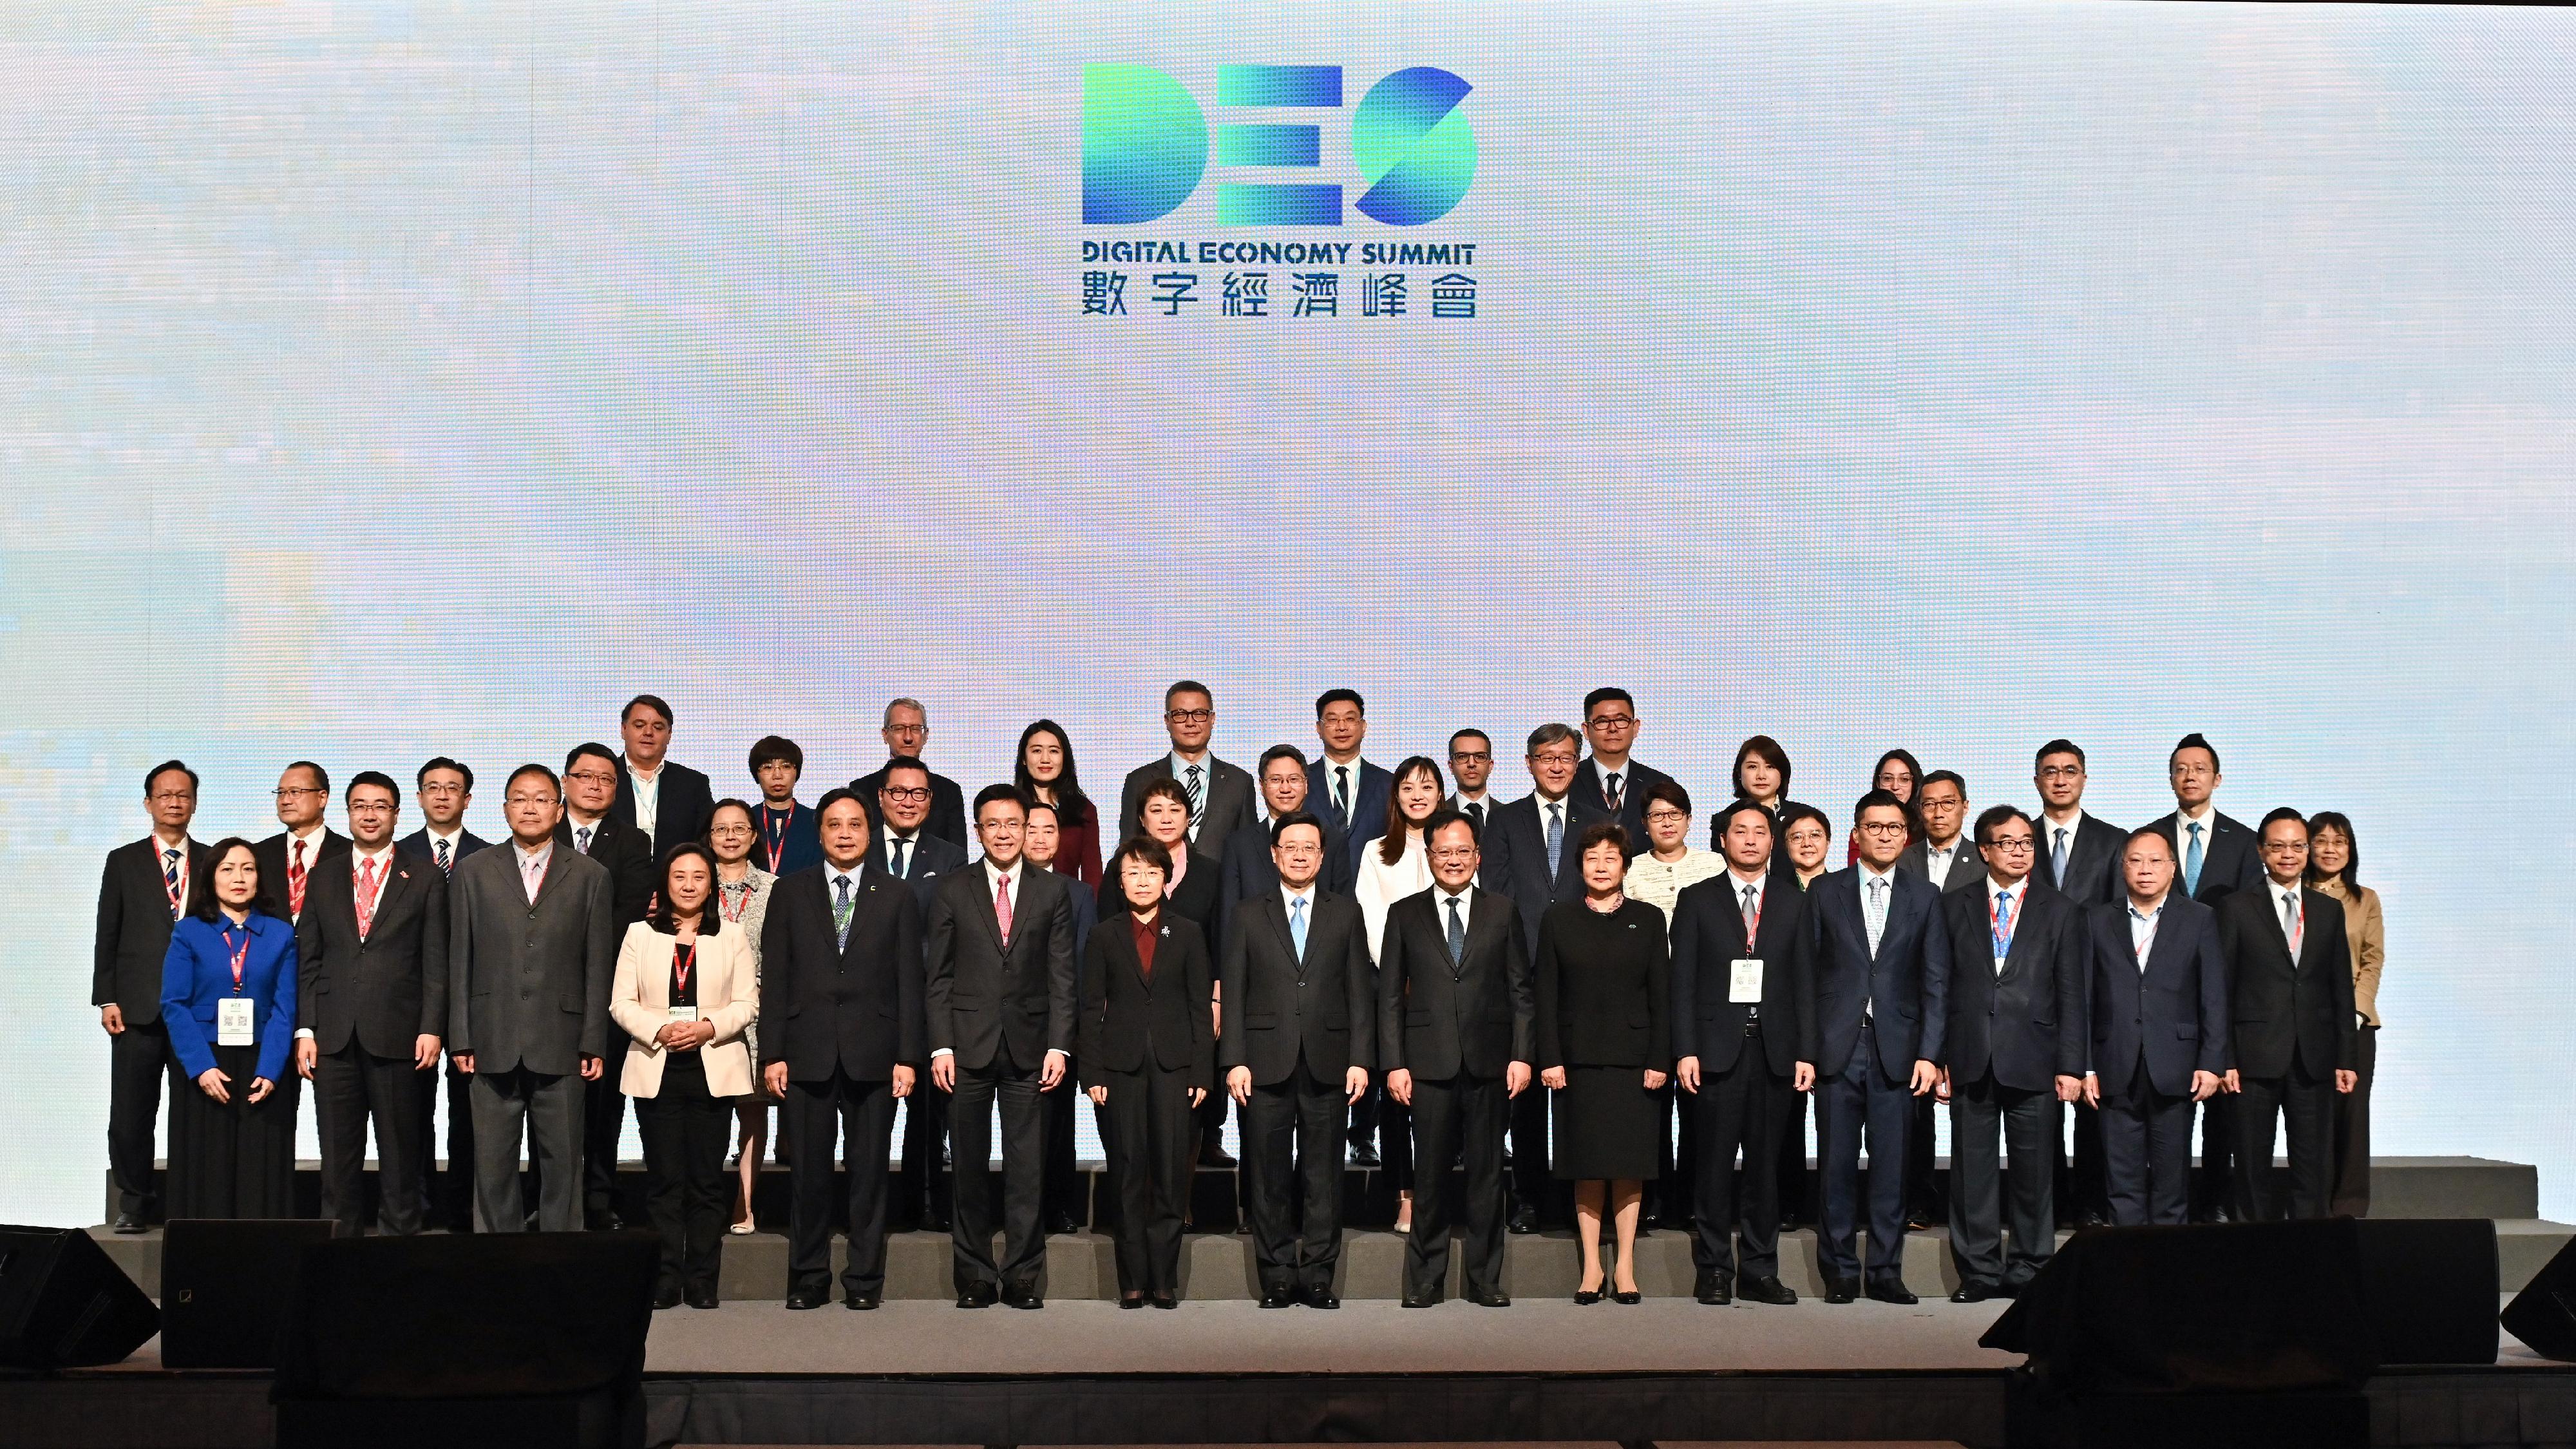 The Chief Executive, Mr John Lee, attended the Digital Economy Summit 2023 today (April 13). Photo shows (first row, from fifth left) the Chairman of the Board of Directors of Hong Kong Cyberport Management Company Limited, Mr Simon Chan; the Secretary for Innovation, Technology and Industry, Professor Sun Dong; Deputy Director of the Cyberspace Administration of China Ms Cao Shumin; Mr Lee; Deputy Minister of the Liaison Office of the Central People's Government in the Hong Kong Special Administrative Region Mr Chen Dong; the President of the China Internet Development Foundation, Ms Wang Xiujun; the Party Secretary and Director-General of Guangdong Provincial Administration of Government Service and Data, Mr Yang Pengfei, and other guests at the summit.